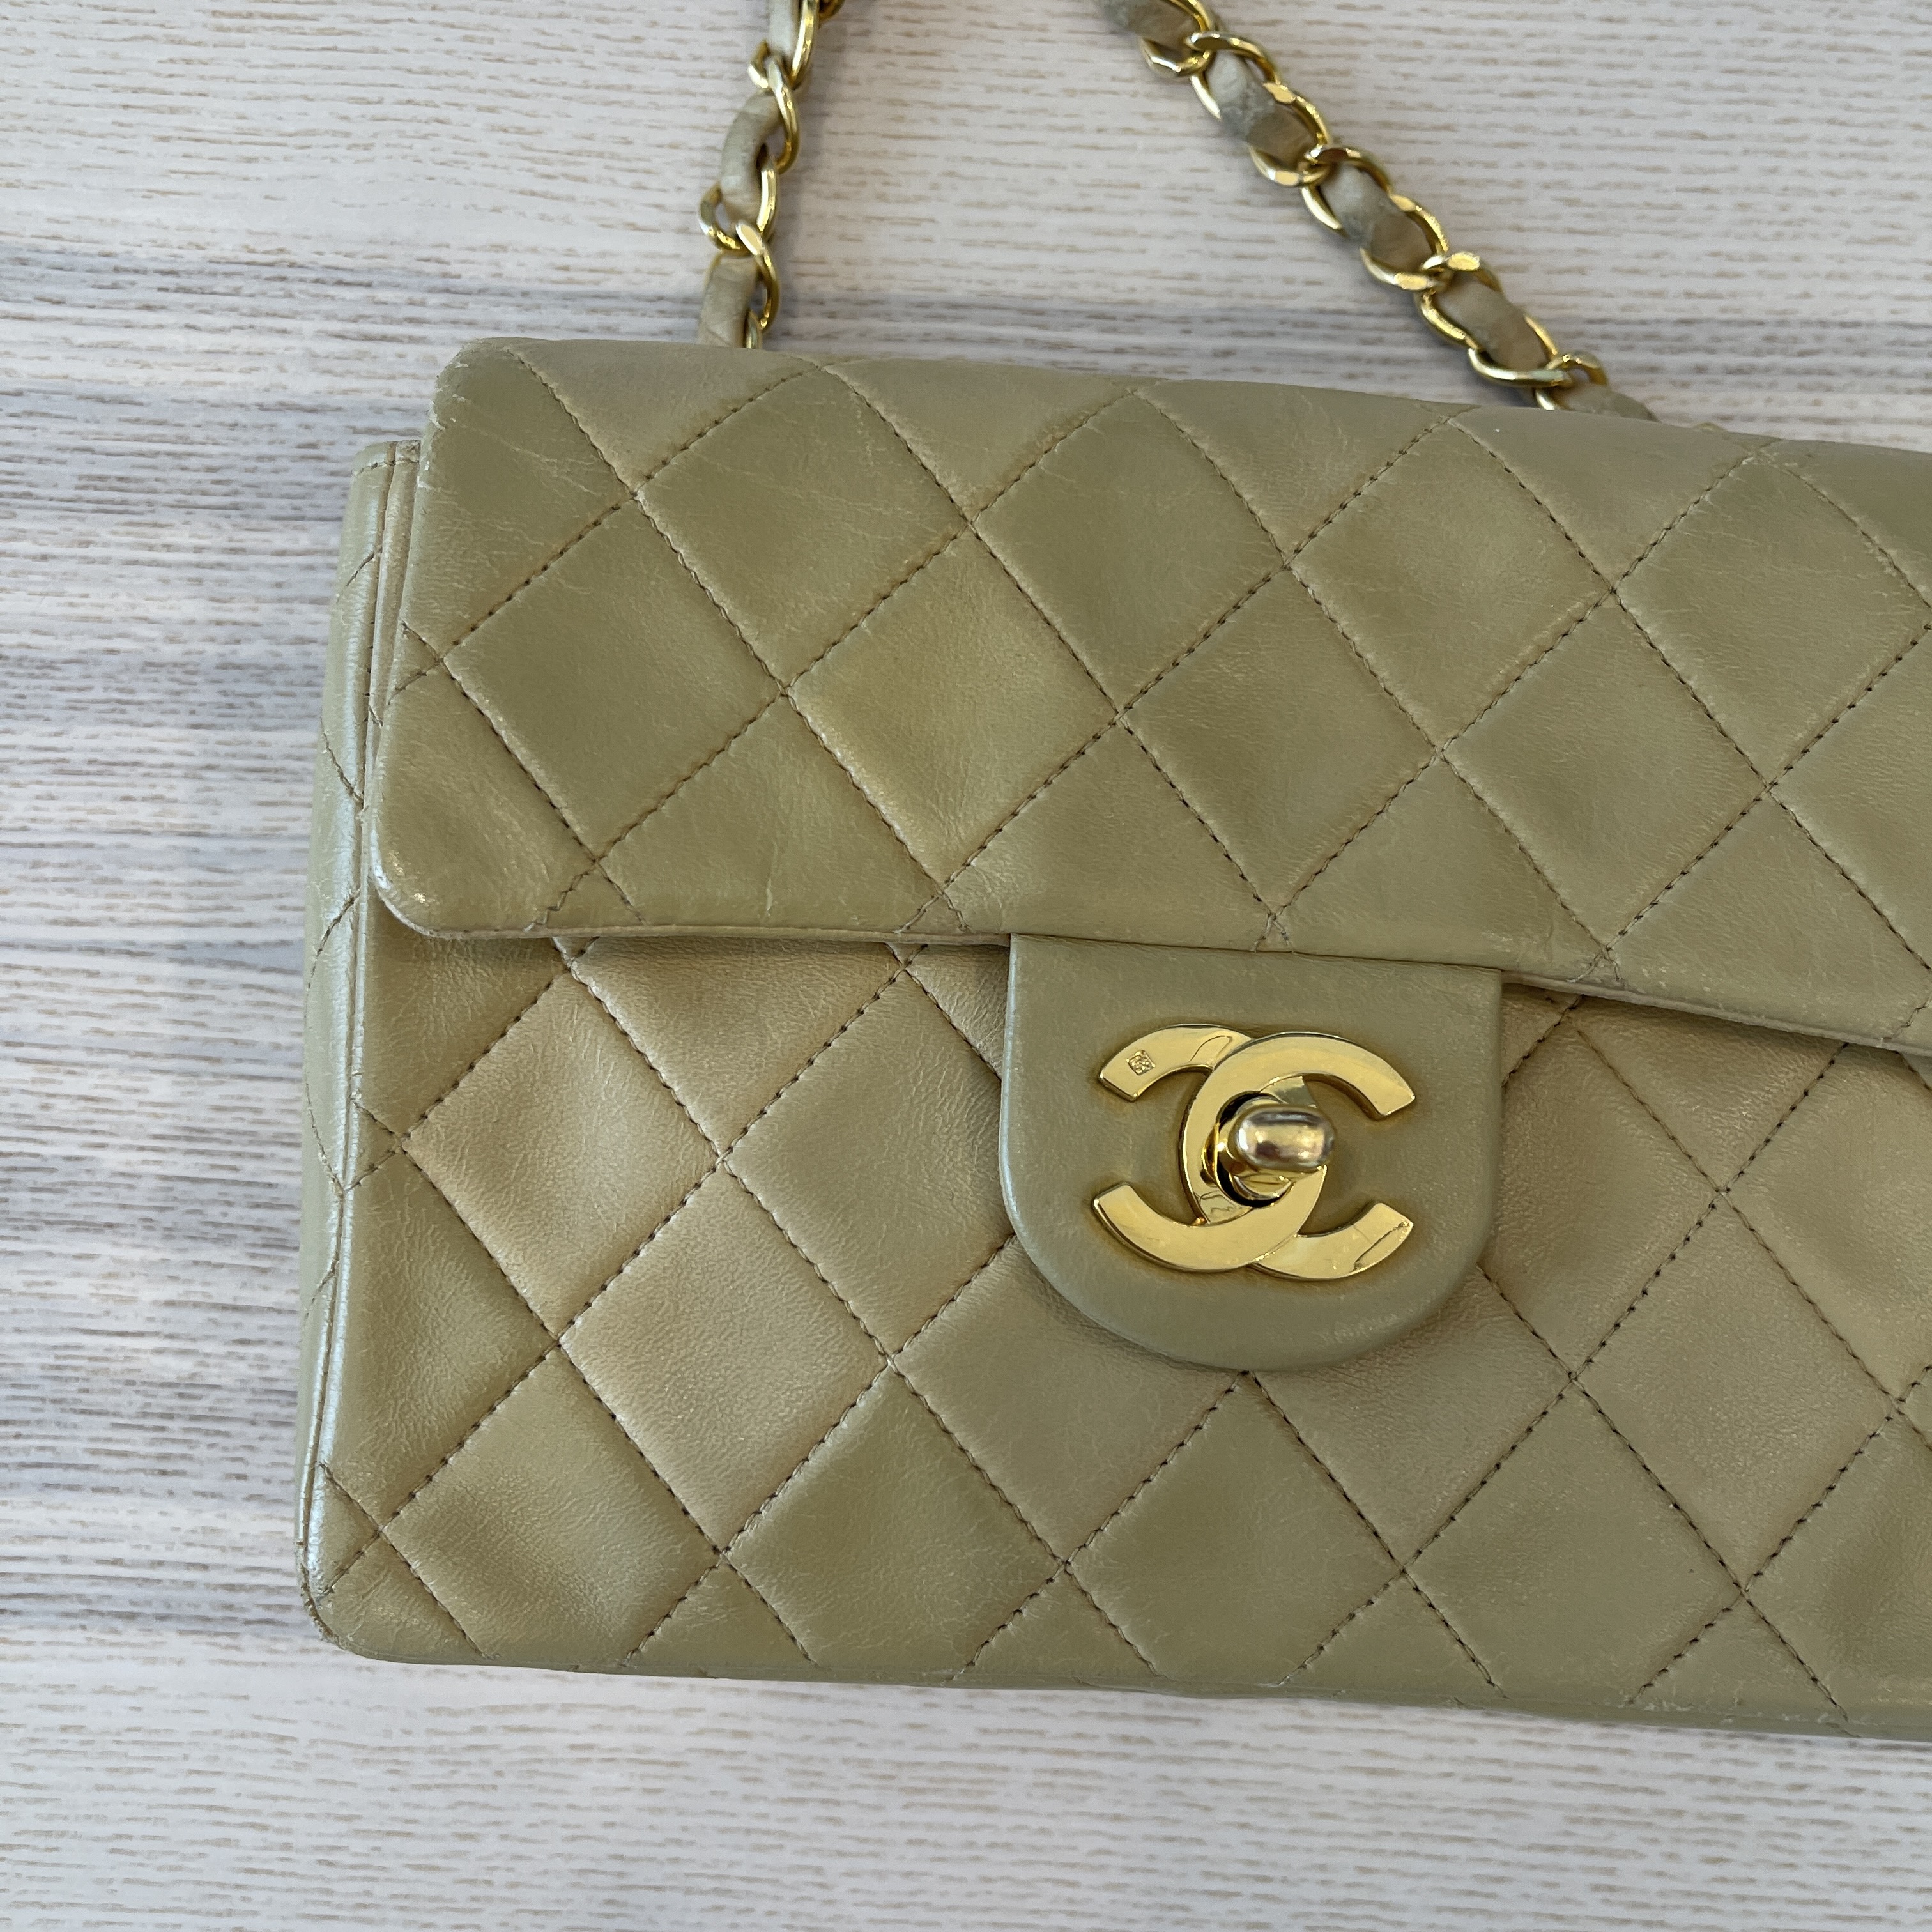 Chanel Beige Quilted Lambskin Leather Classic Square Mini Flap Bag